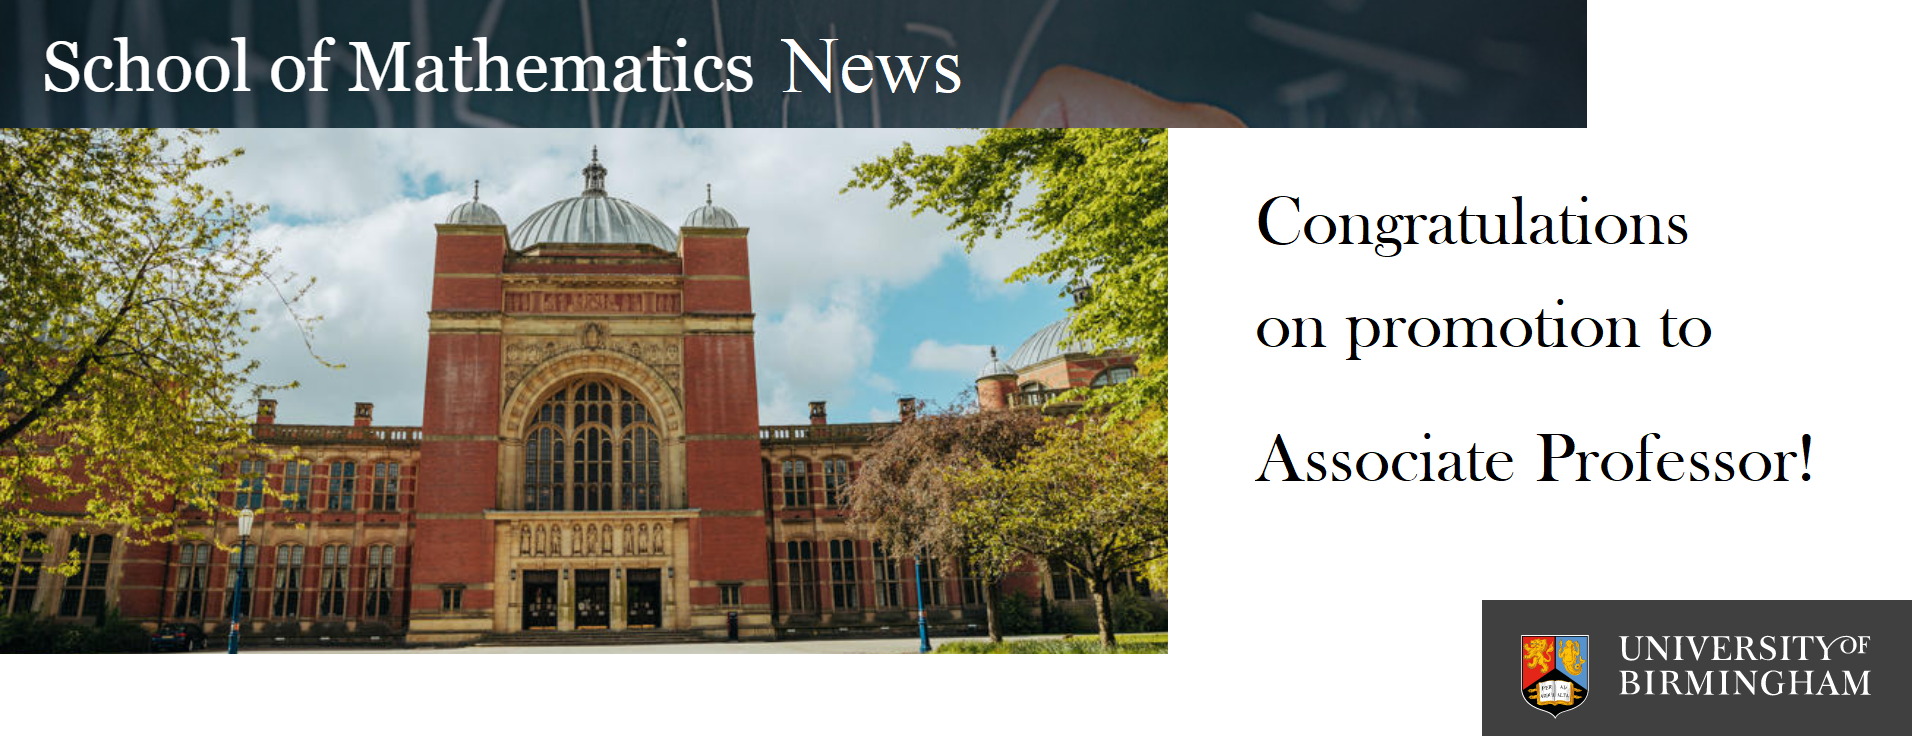 Picture of Aston Webb building with text "Congratulations on promotion to Assistant Professor!"